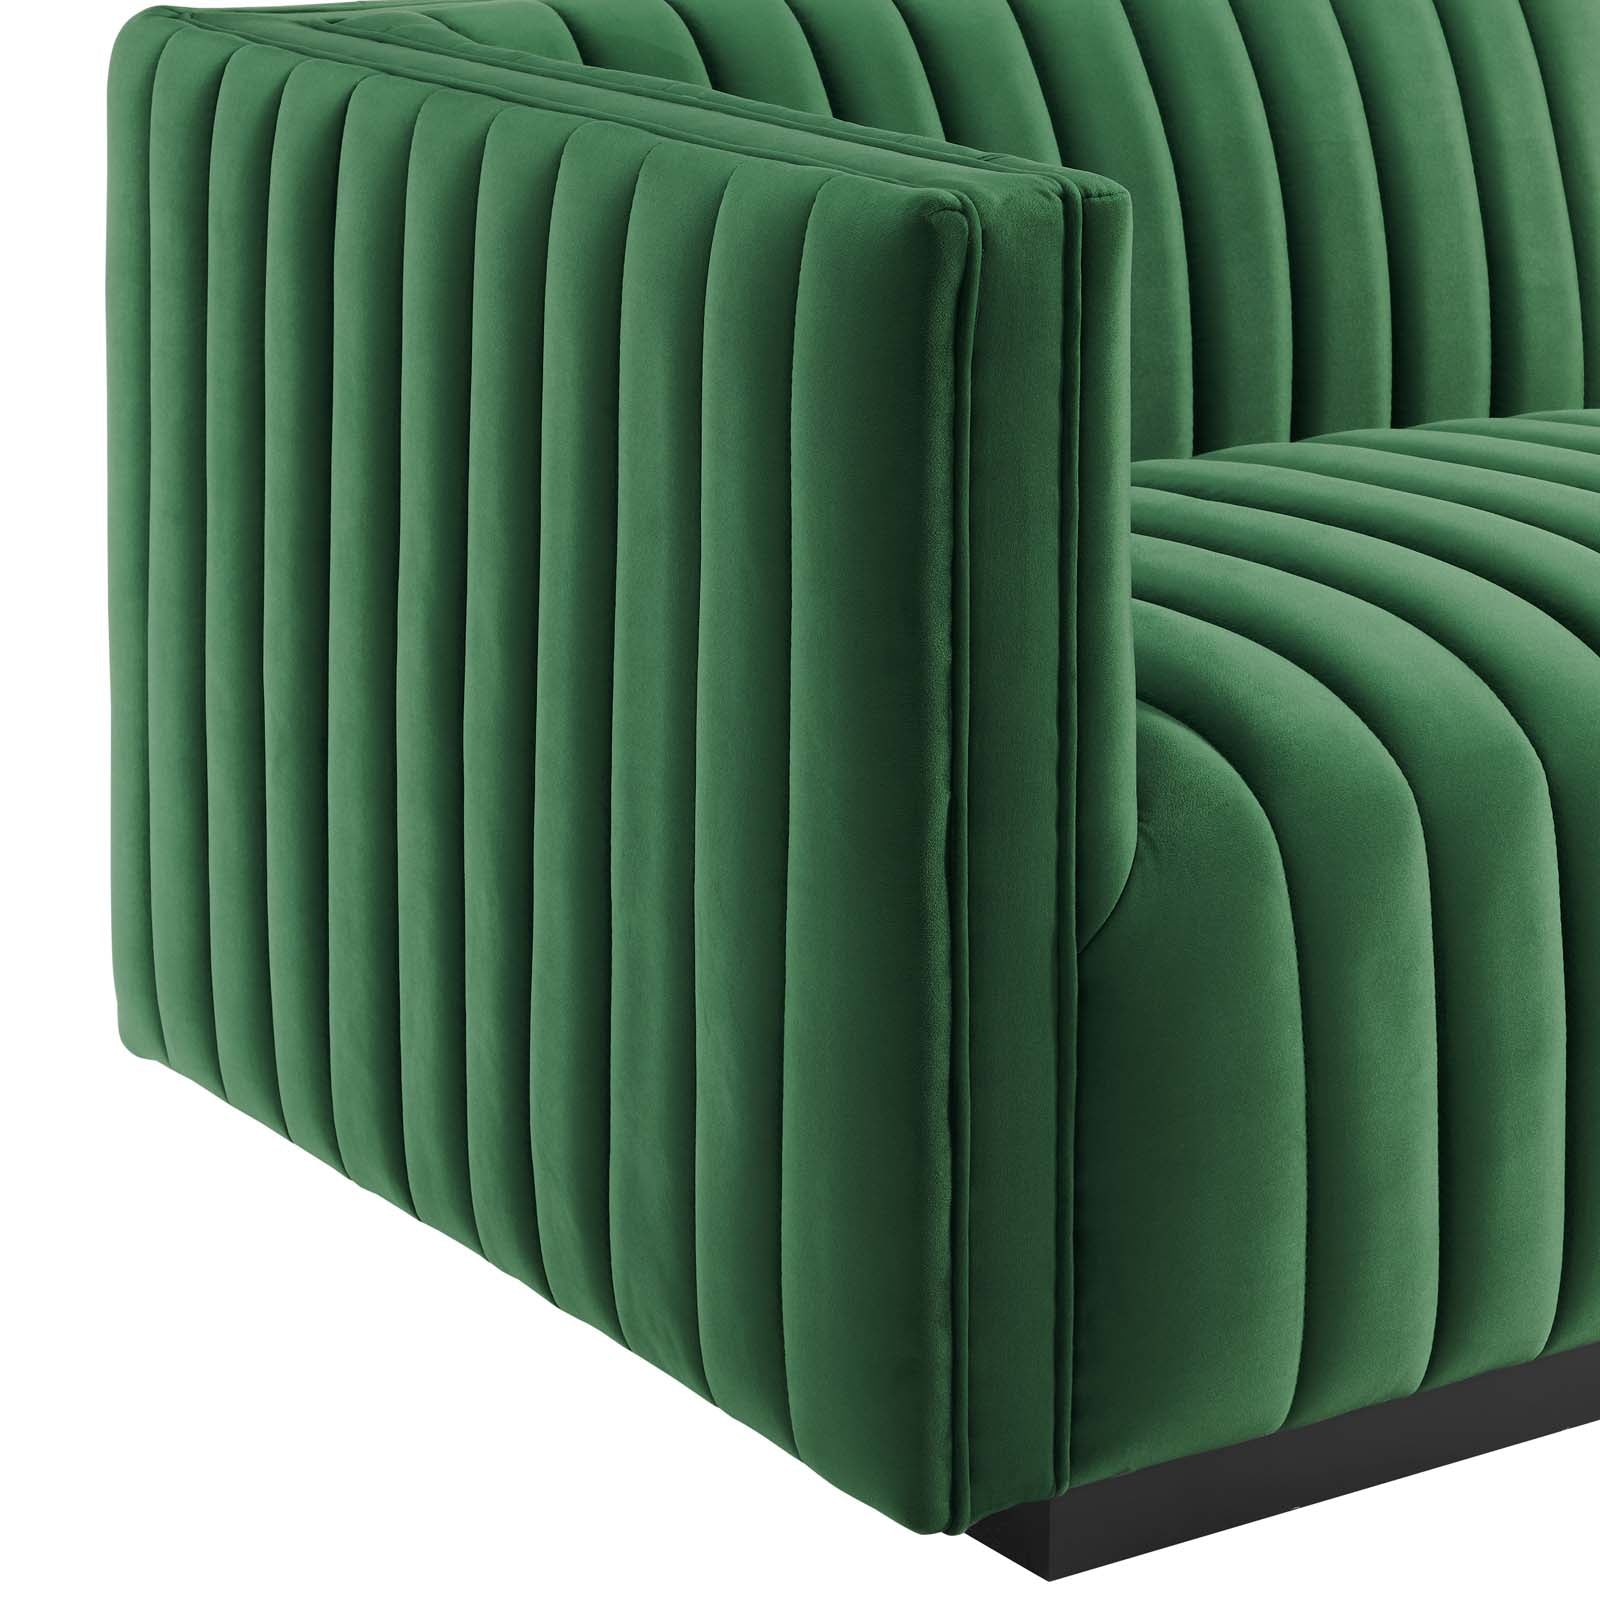 Modway Sofas & Couches - Conjure Channel Tufted Performance Velvet Sofa Black Emerald